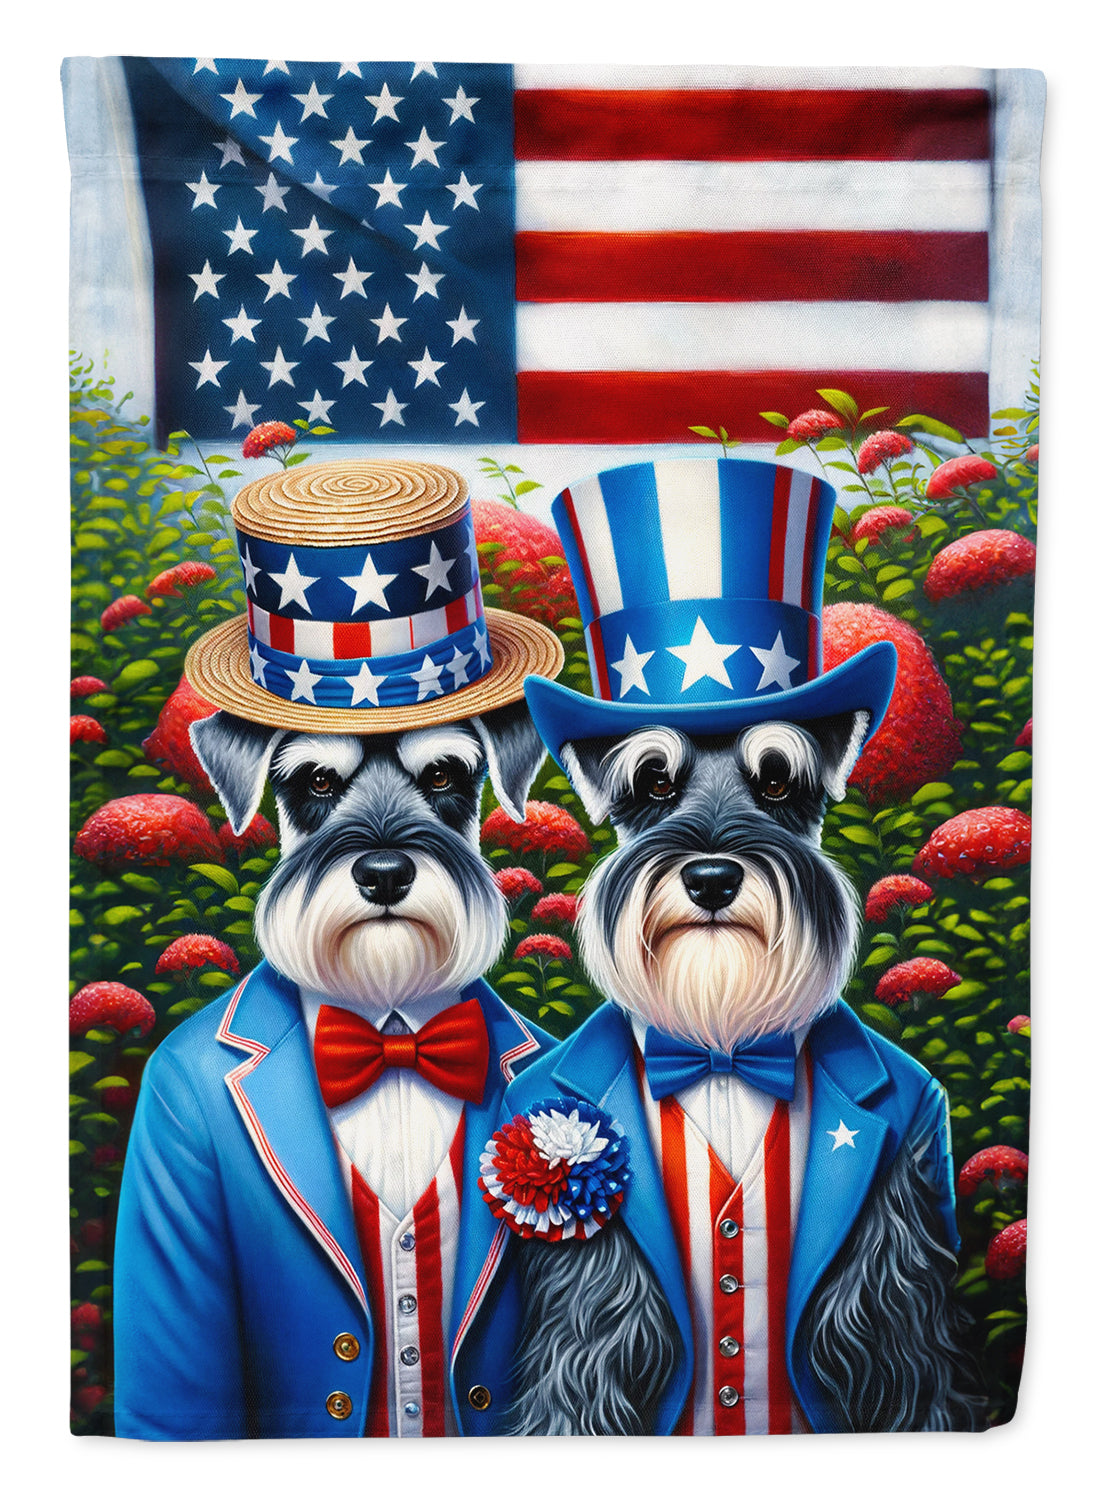 Buy this All American Schnauzer House Flag